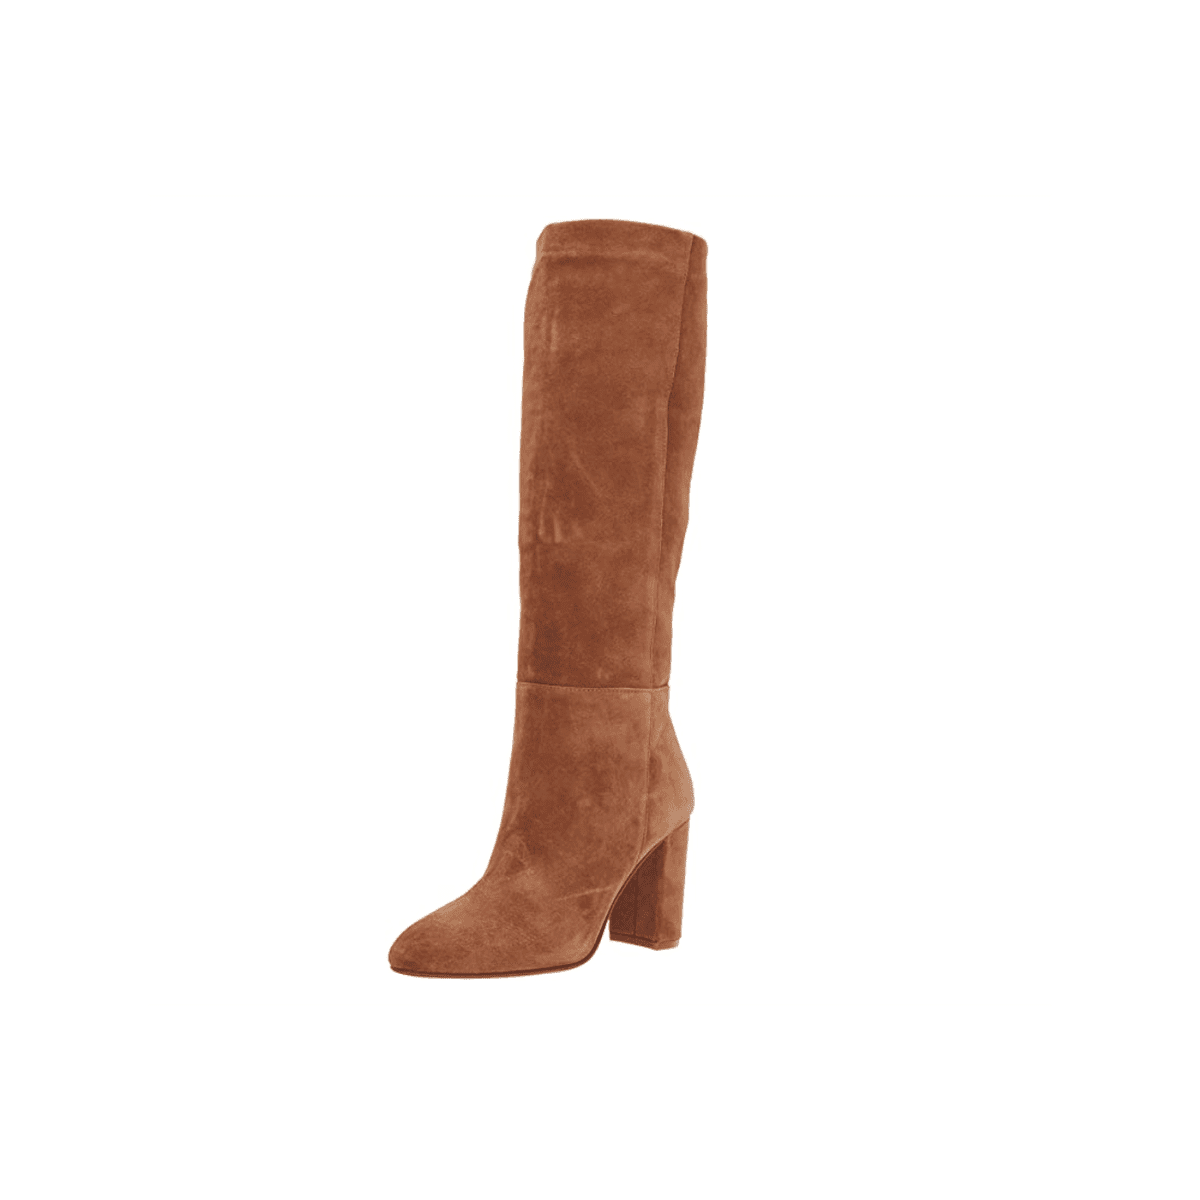 16 Must-Have Fall Boot Styles 2020 